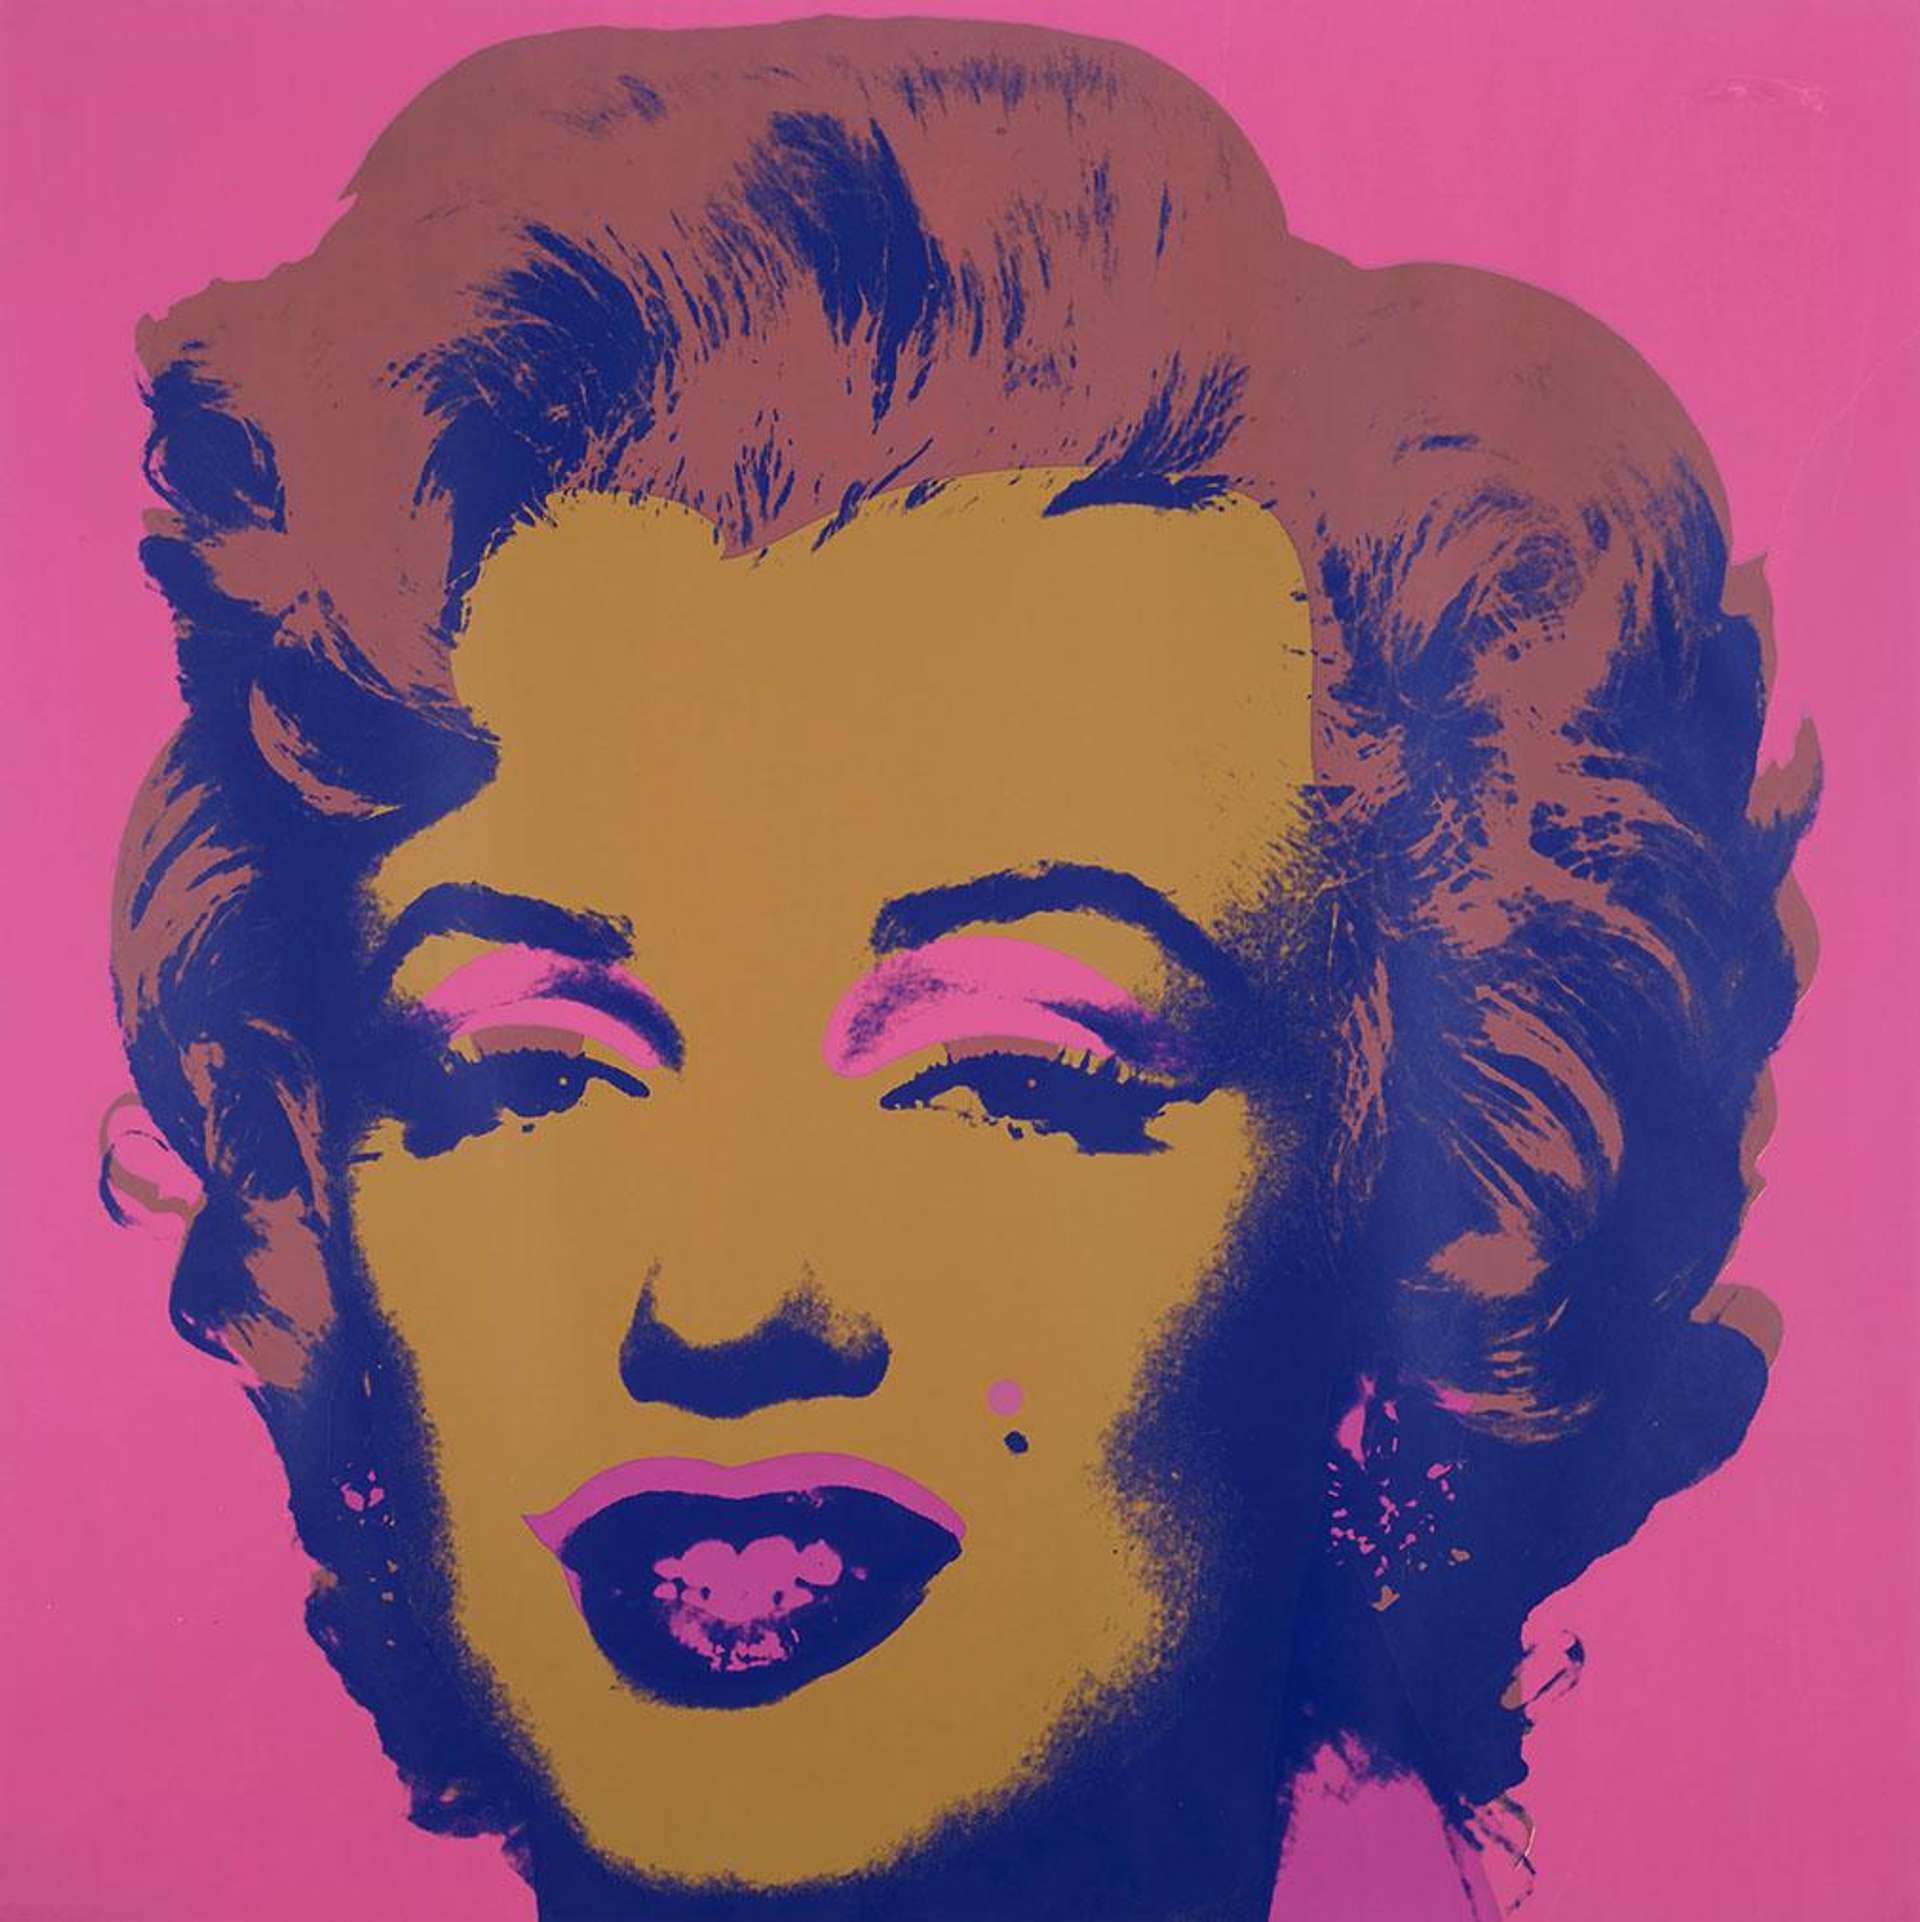 Andy Warhol’s Marilyn (F. & S. II.27). A Pop Art style image of Marilyn Monroe, in hues of pink, orange and brown.